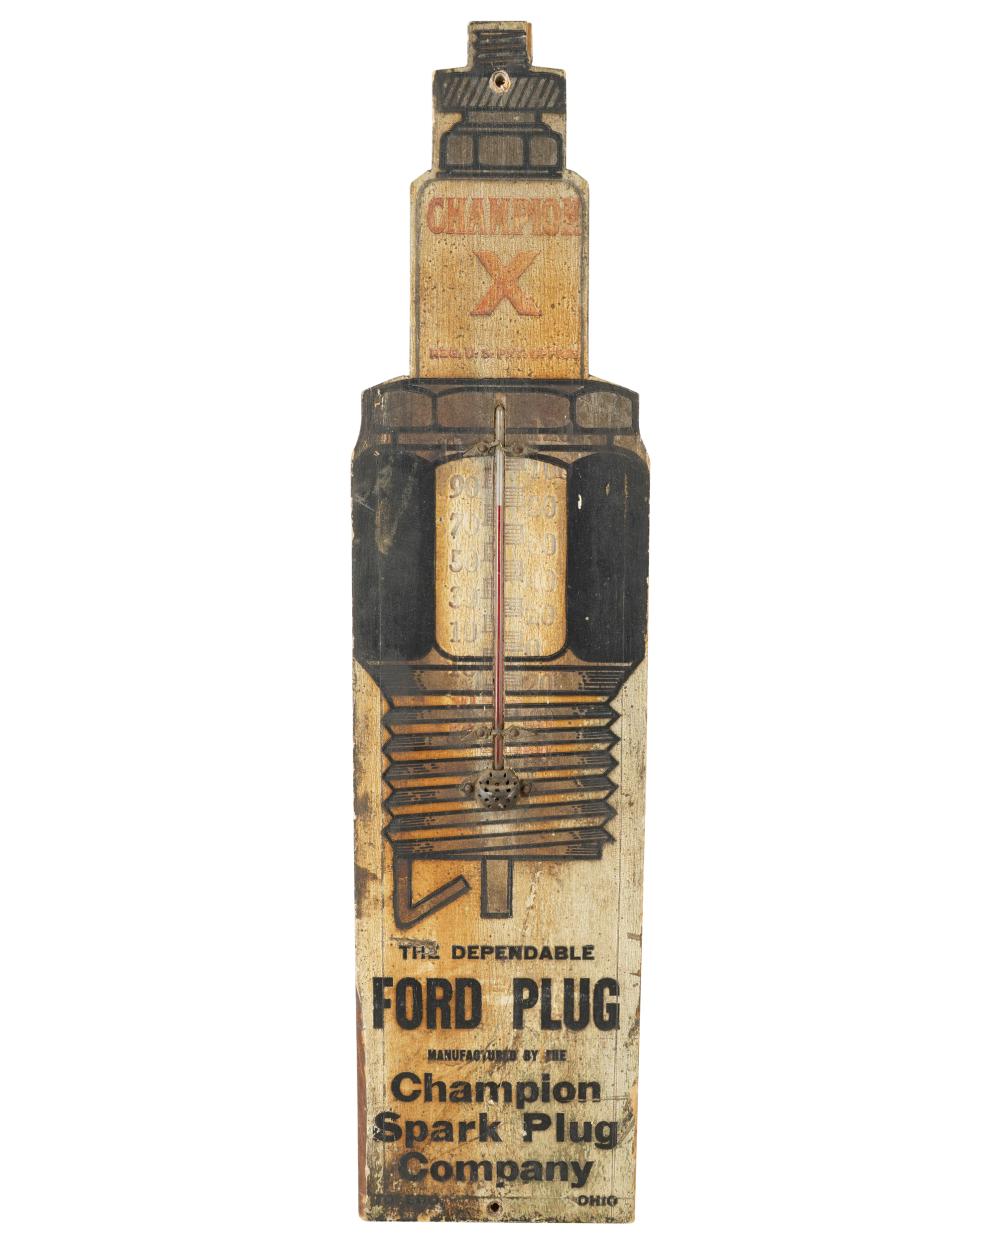 FORD PLUG ADVERTISING SIGNpainted